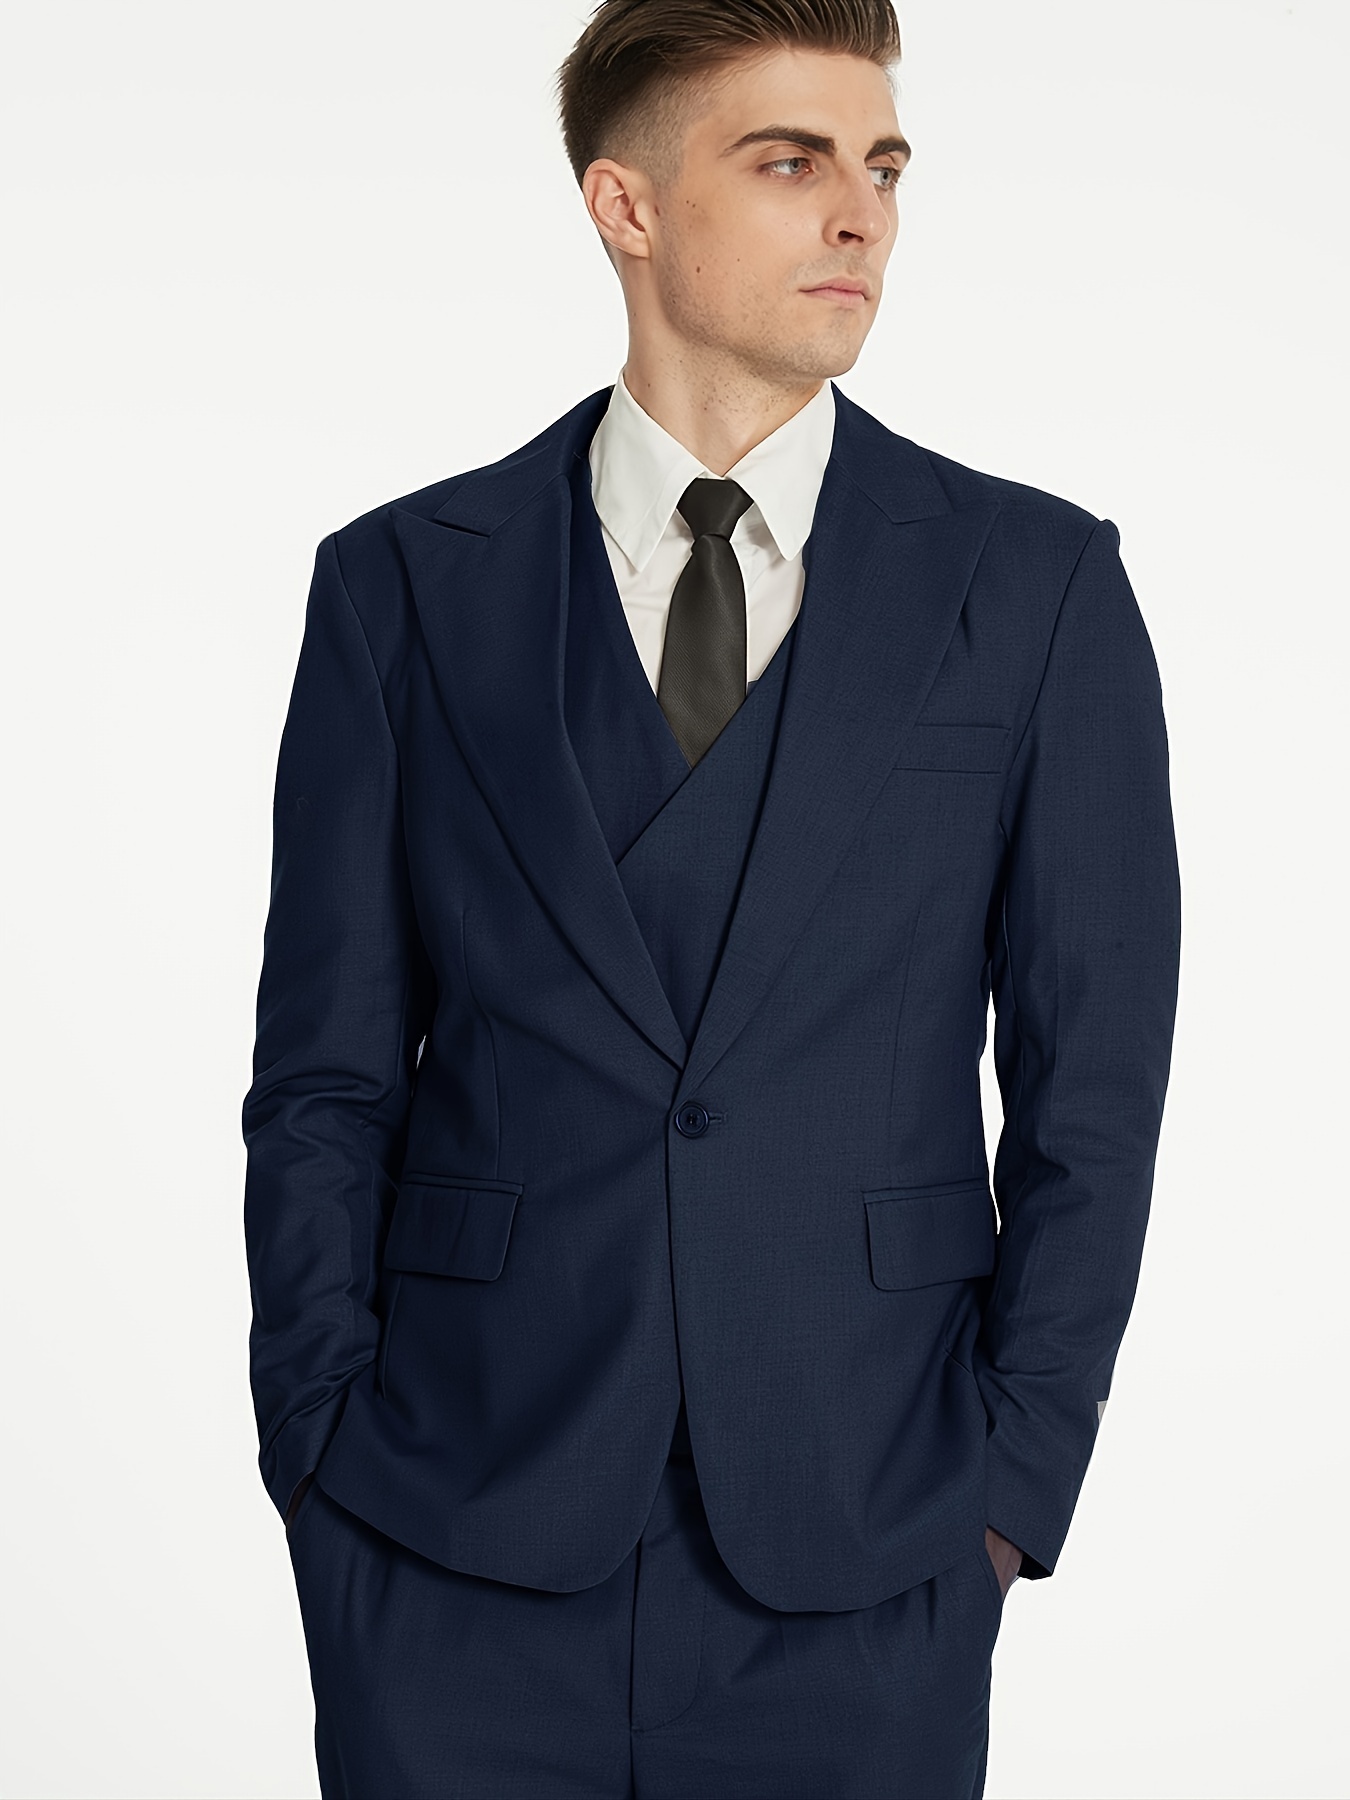 Slim Fit Pinstripes Mens Pinstripe Suit With Blazer And Pants Perfect For  Formal Business, Weddings, And Groomsmen From Missher, $114.72